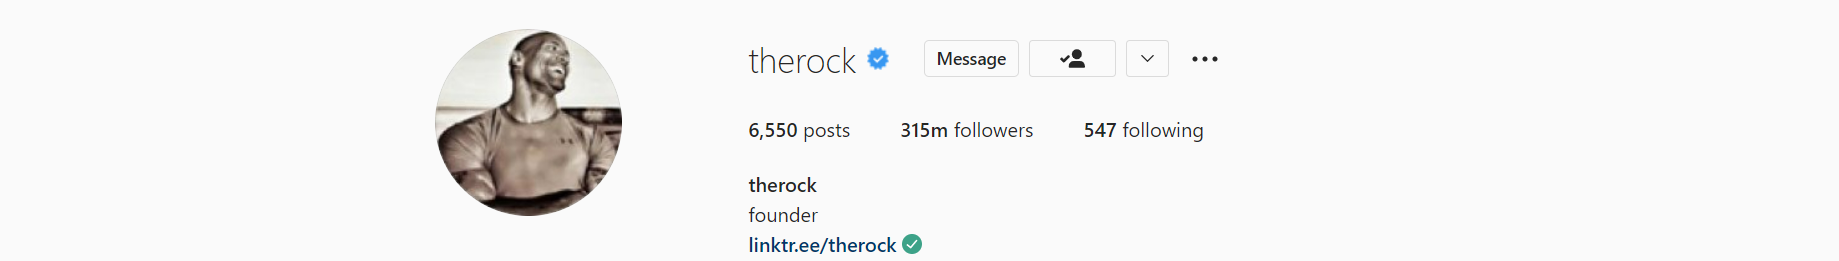 Who-has-the-most-followers-on-Instagram?